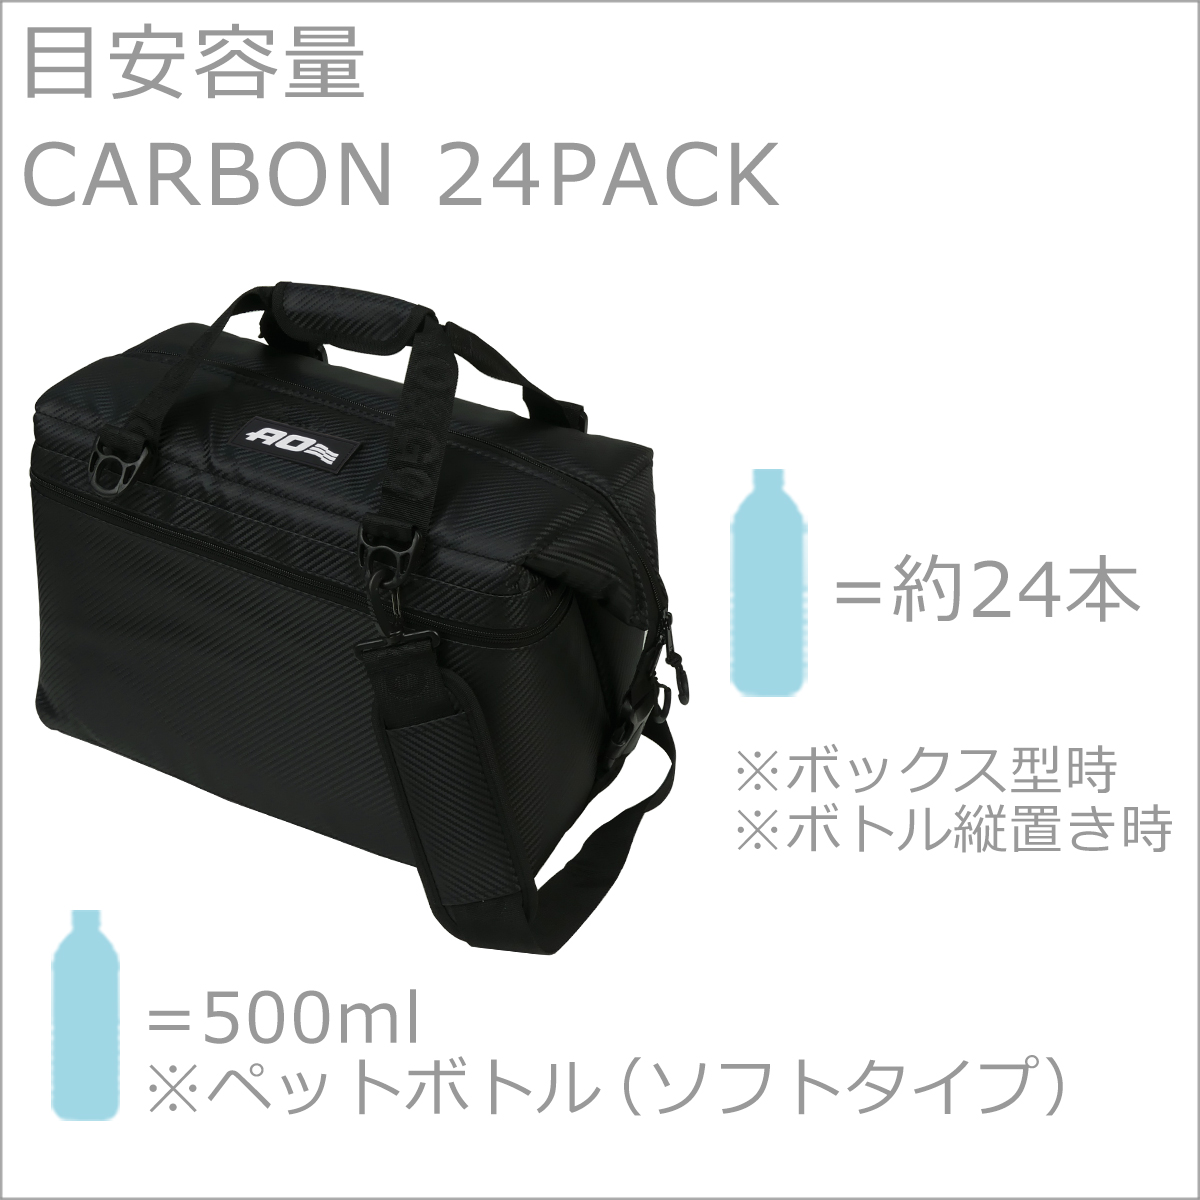 AOクーラーズ クーラーボックス AO Coolers 24 PACK CARBON カーボン